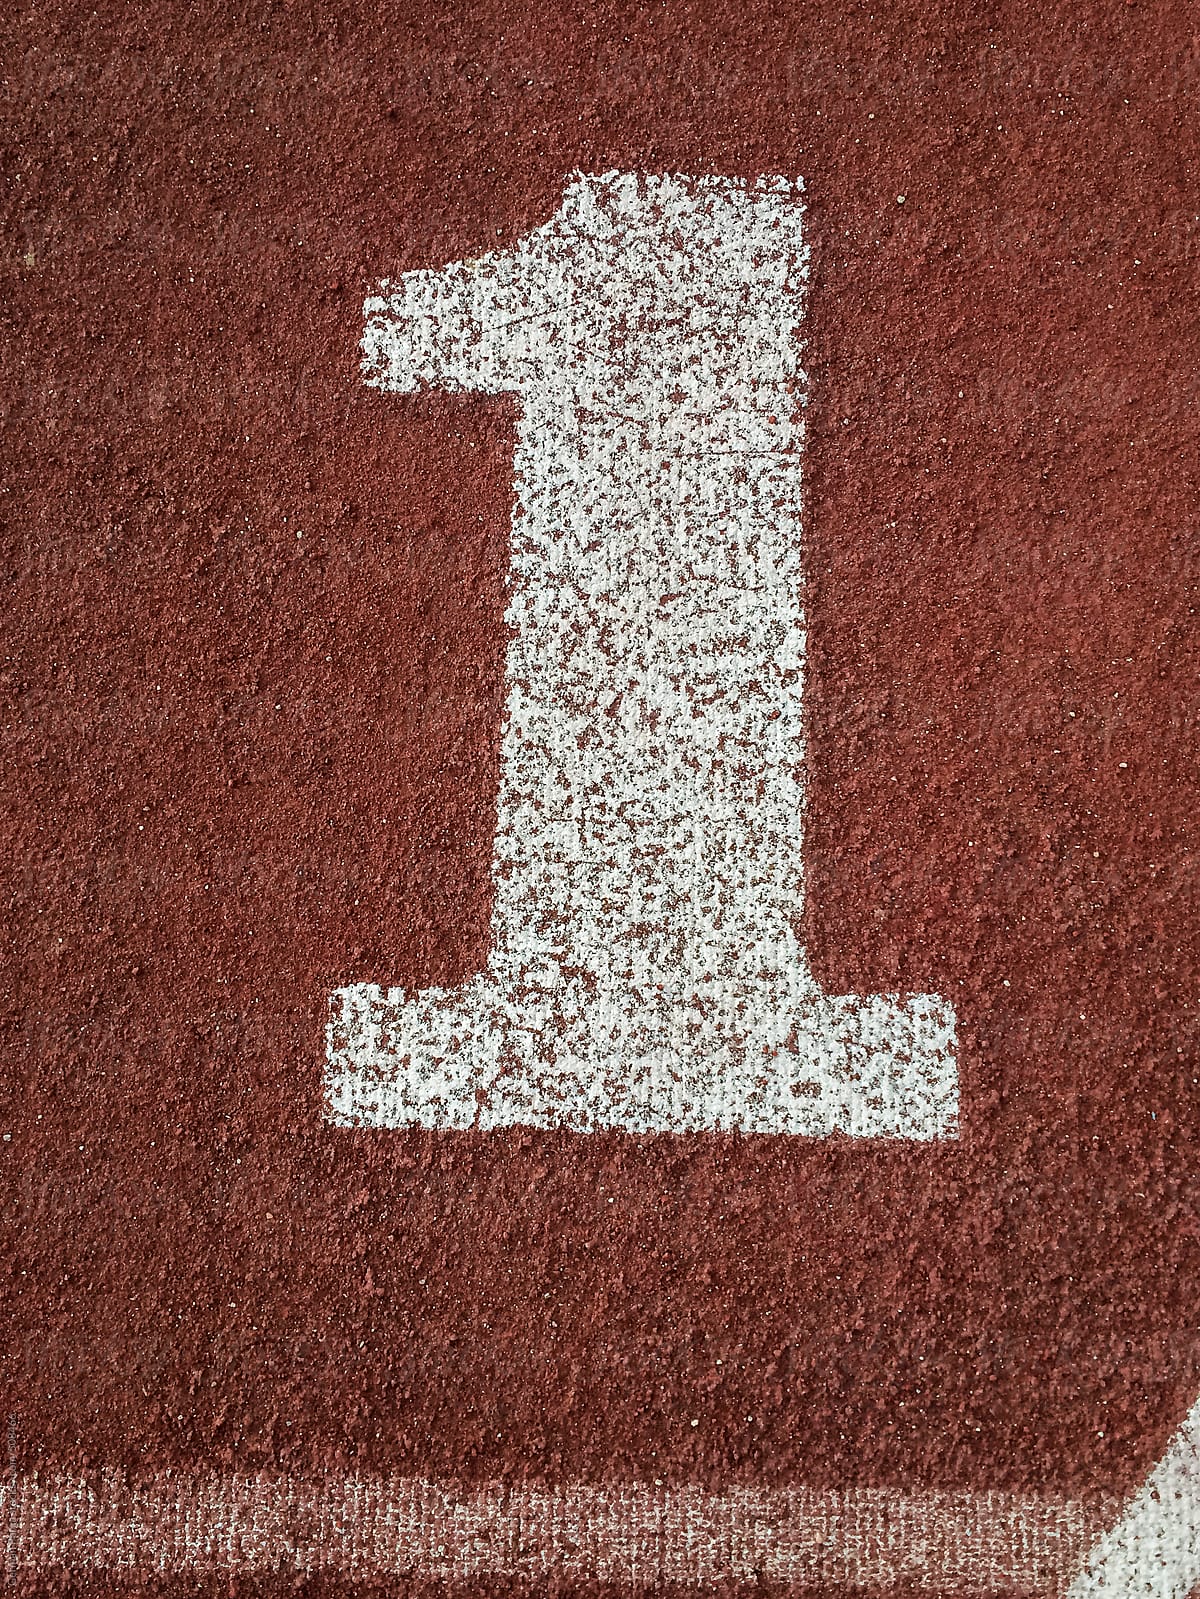 White number one painted on an running track